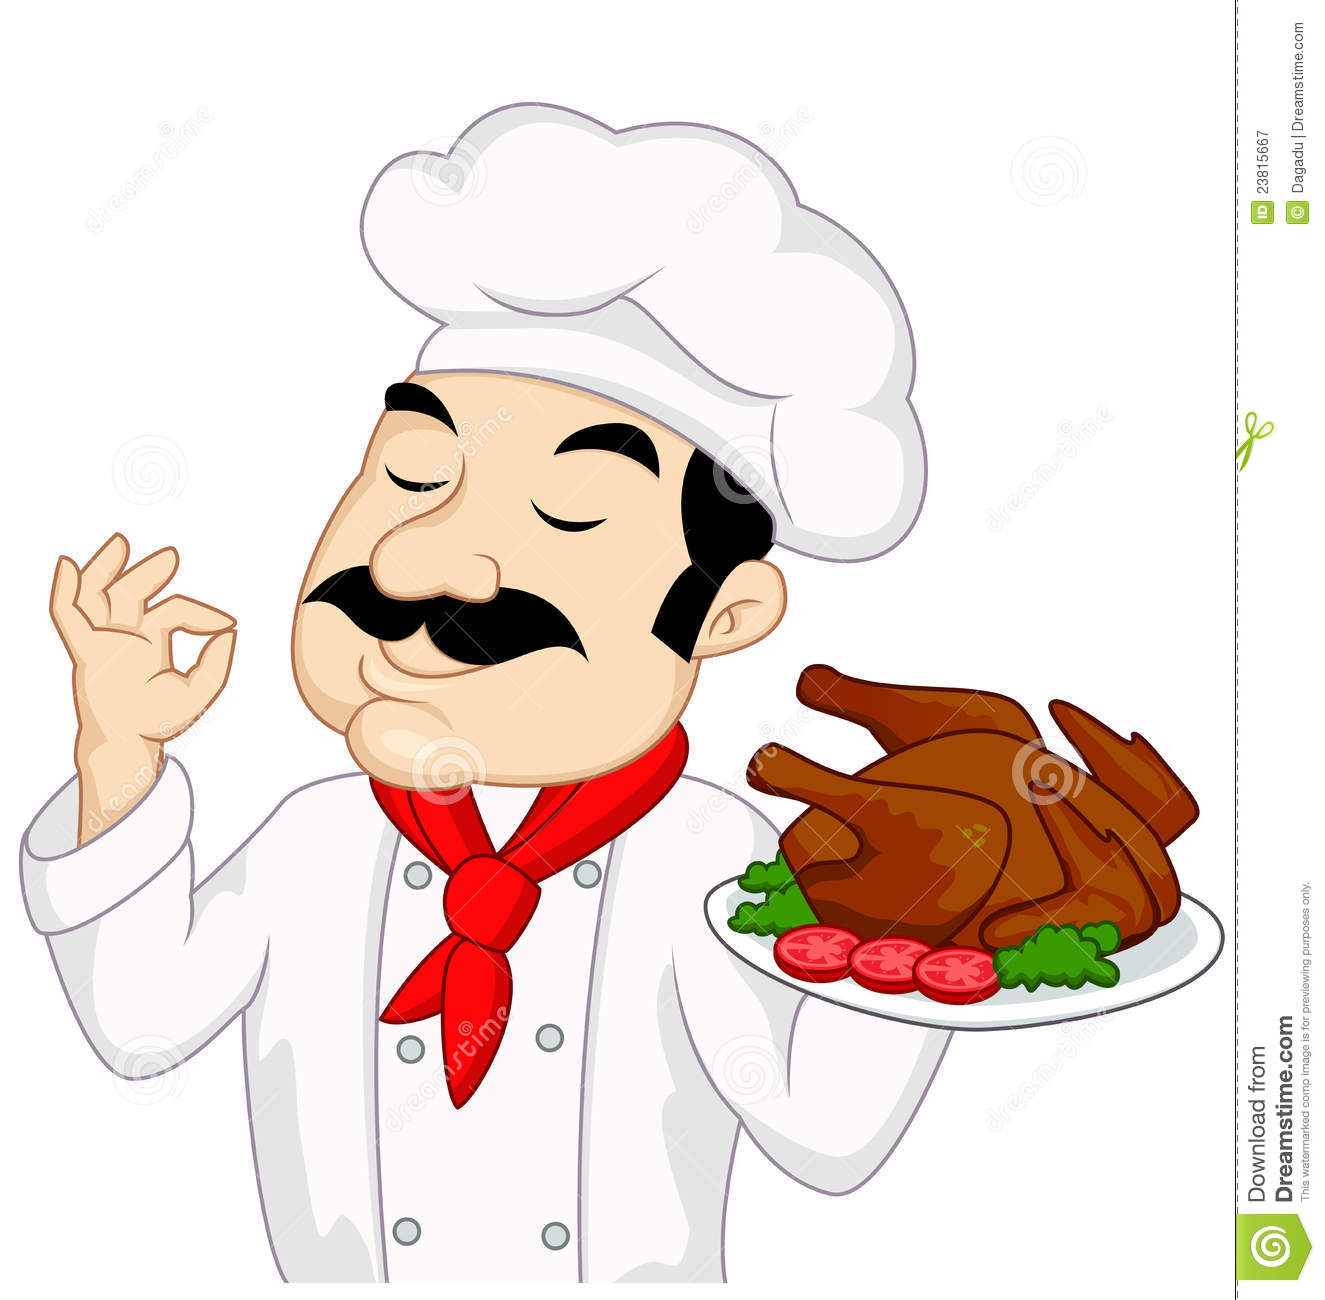 Turkey Dinner Plate   Clipart Panda   Free Clipart Images